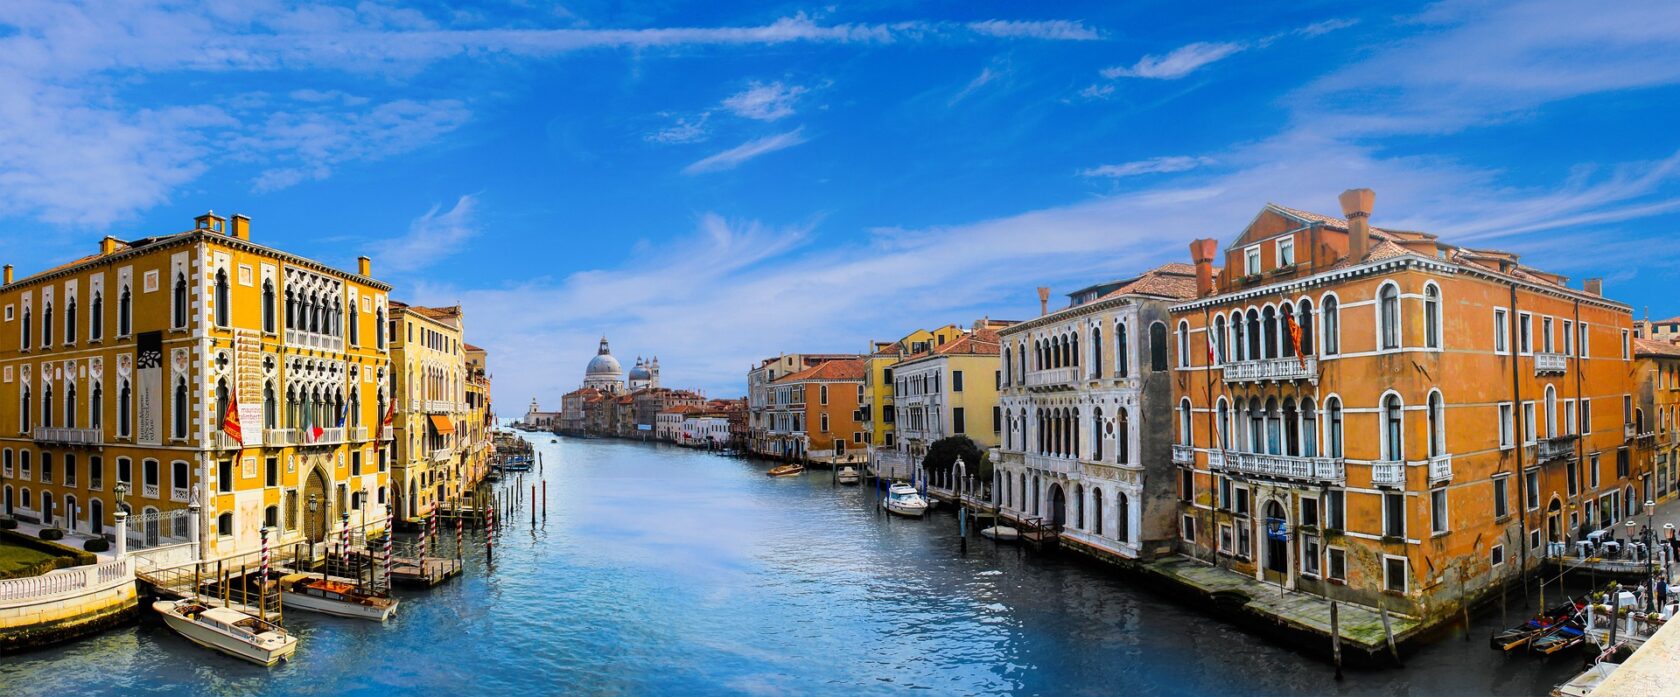 A view of the canals in Venice, Italy (an Atlantis site).